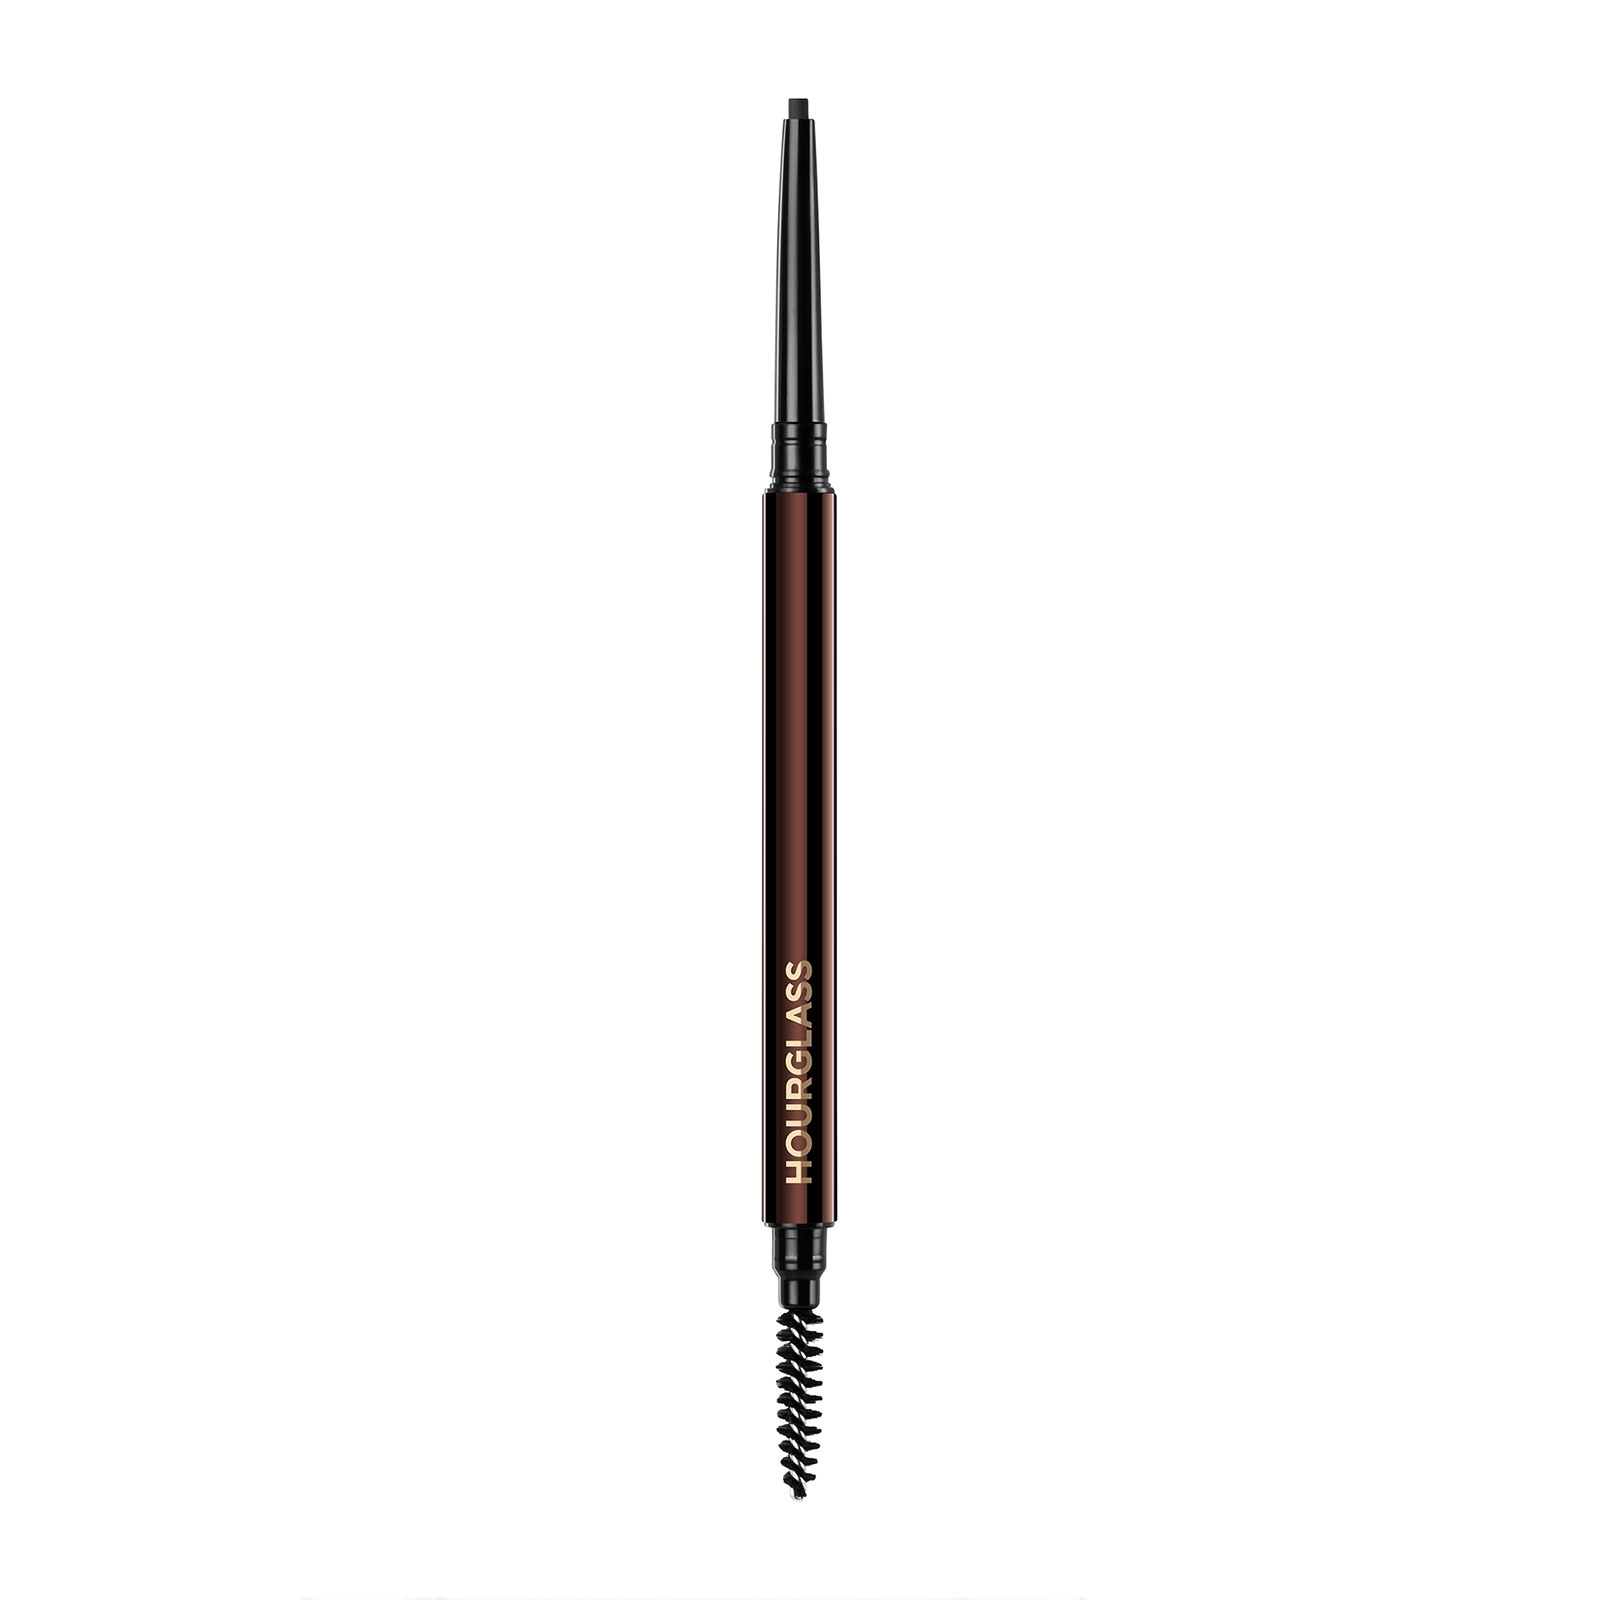 Hourglass Arch Brow Micro Sculpting Pencil 0.4G Natural Black